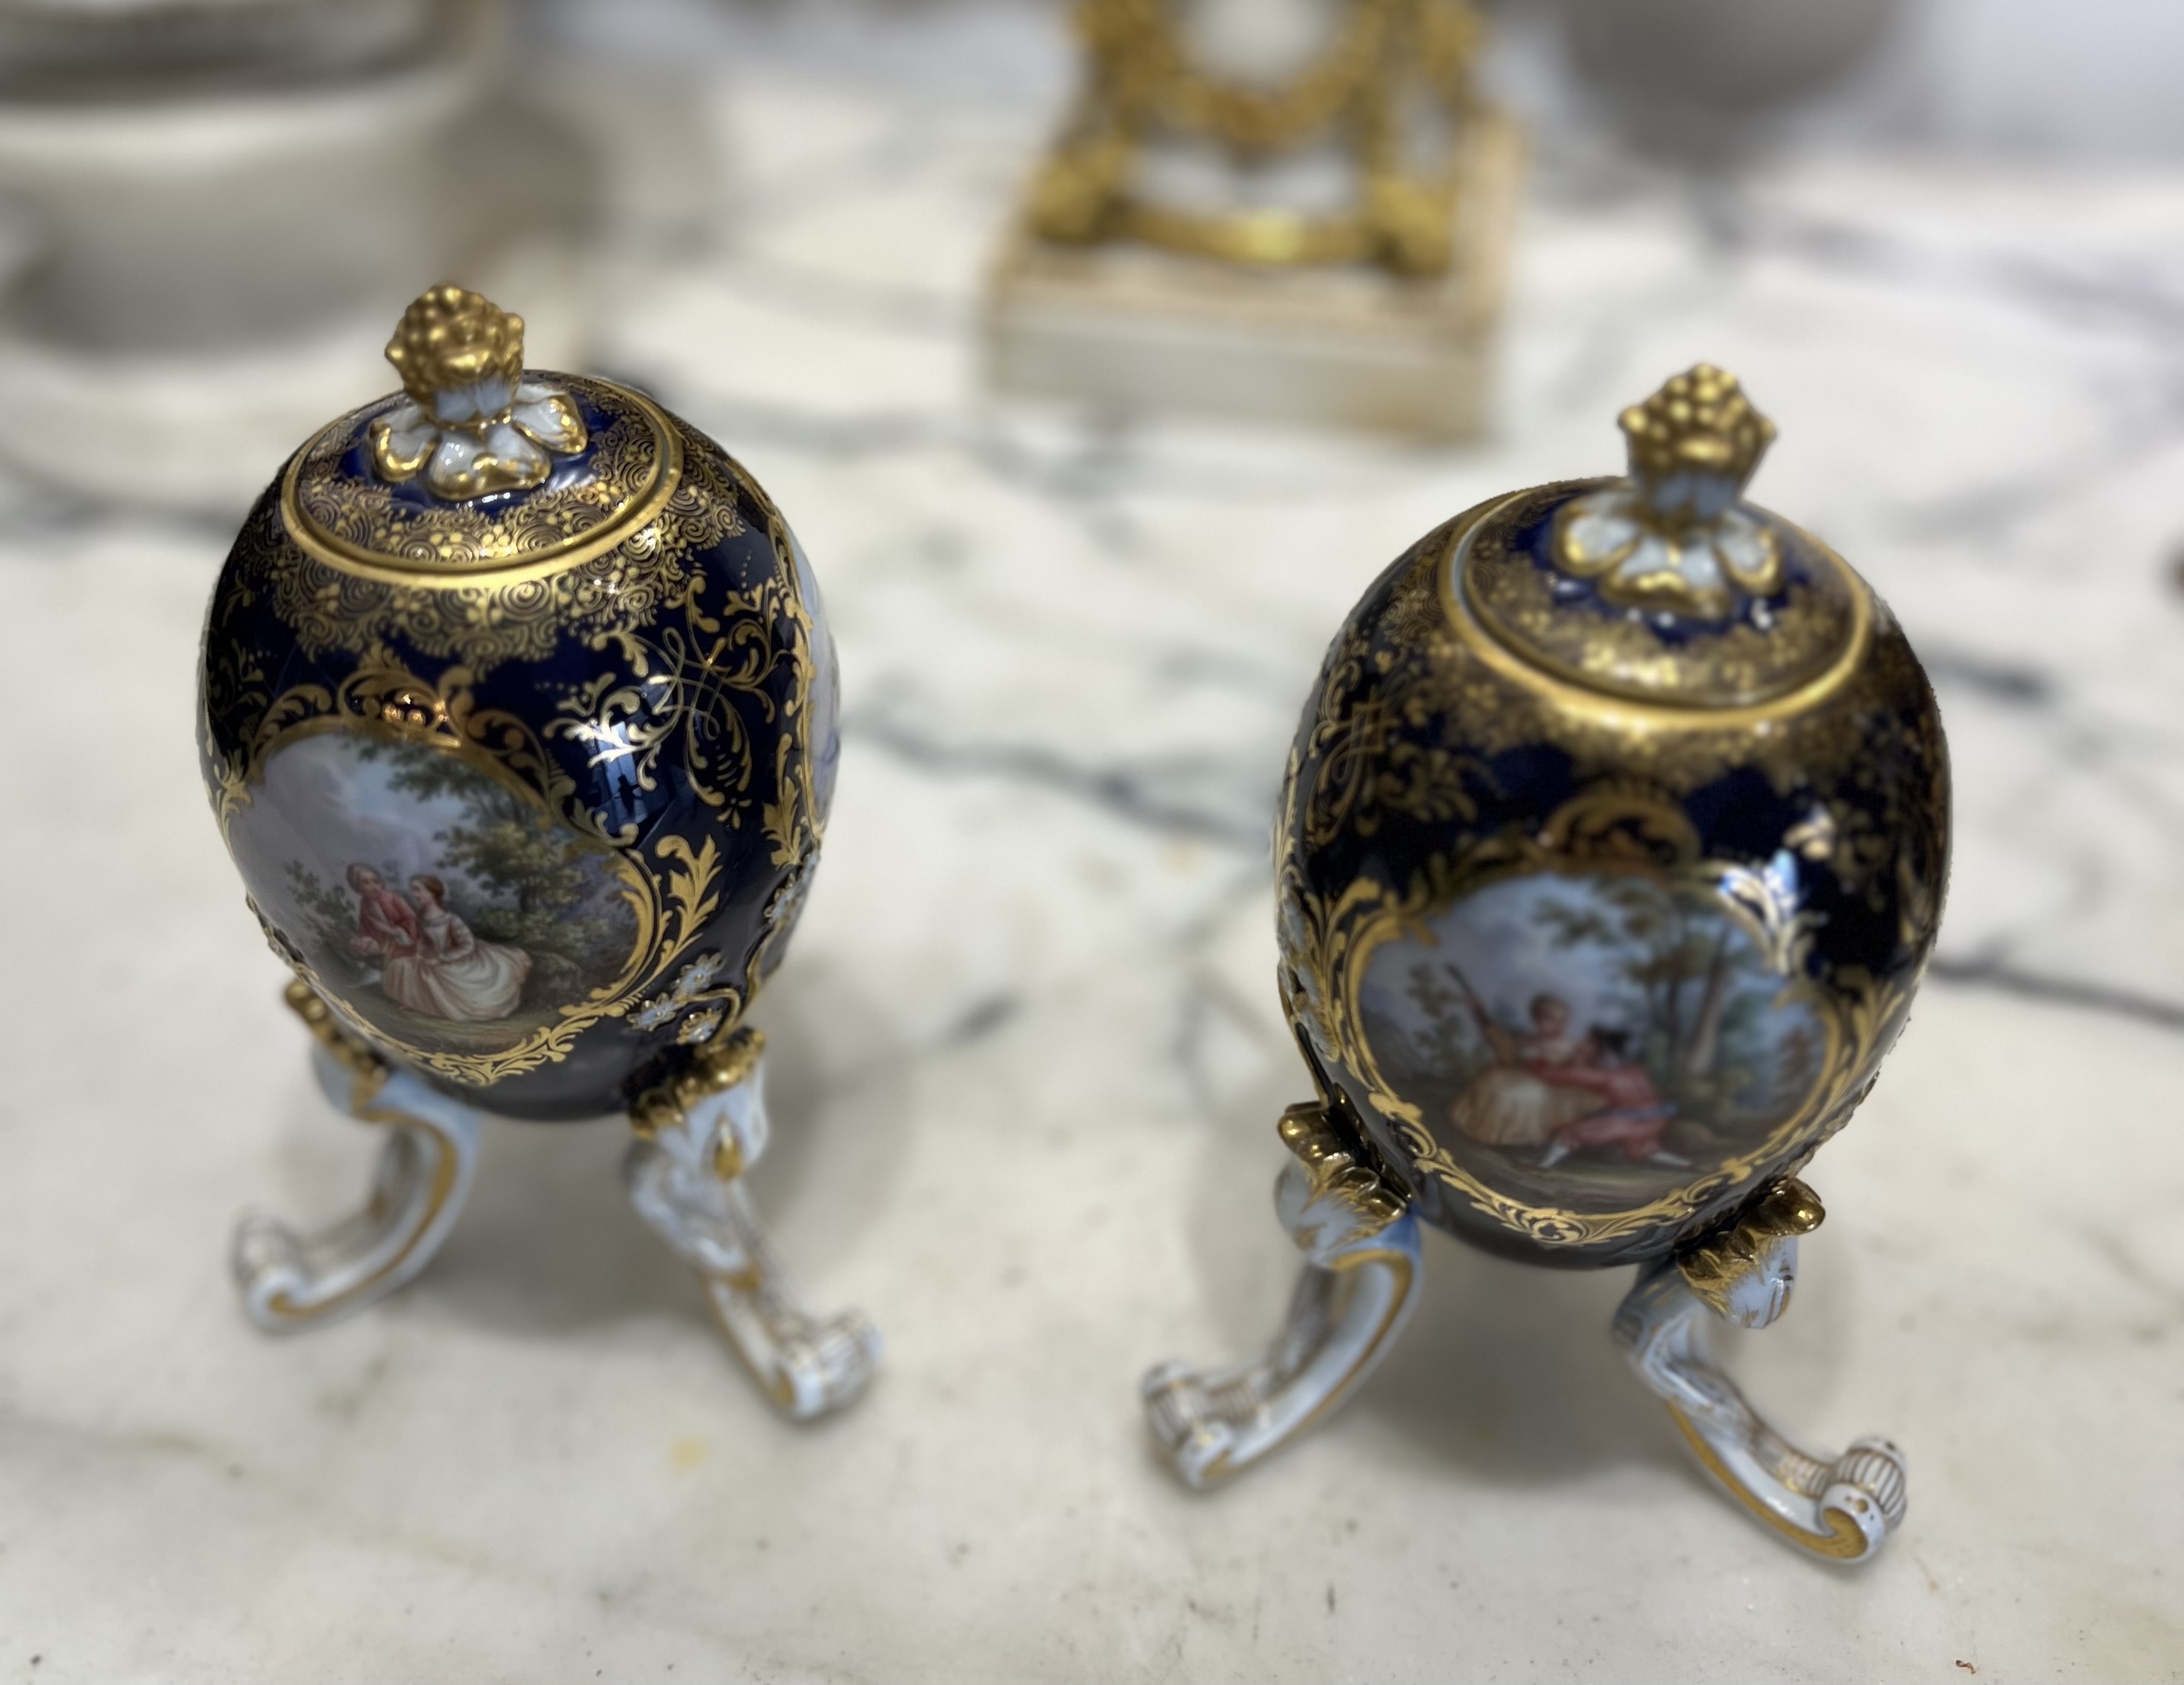 MEISSEN: A PAIR OF LATE 19TH / EARLY 20TH CENTURY PORCELAIN EGG SHAPED TEA CADDIES - Image 4 of 16